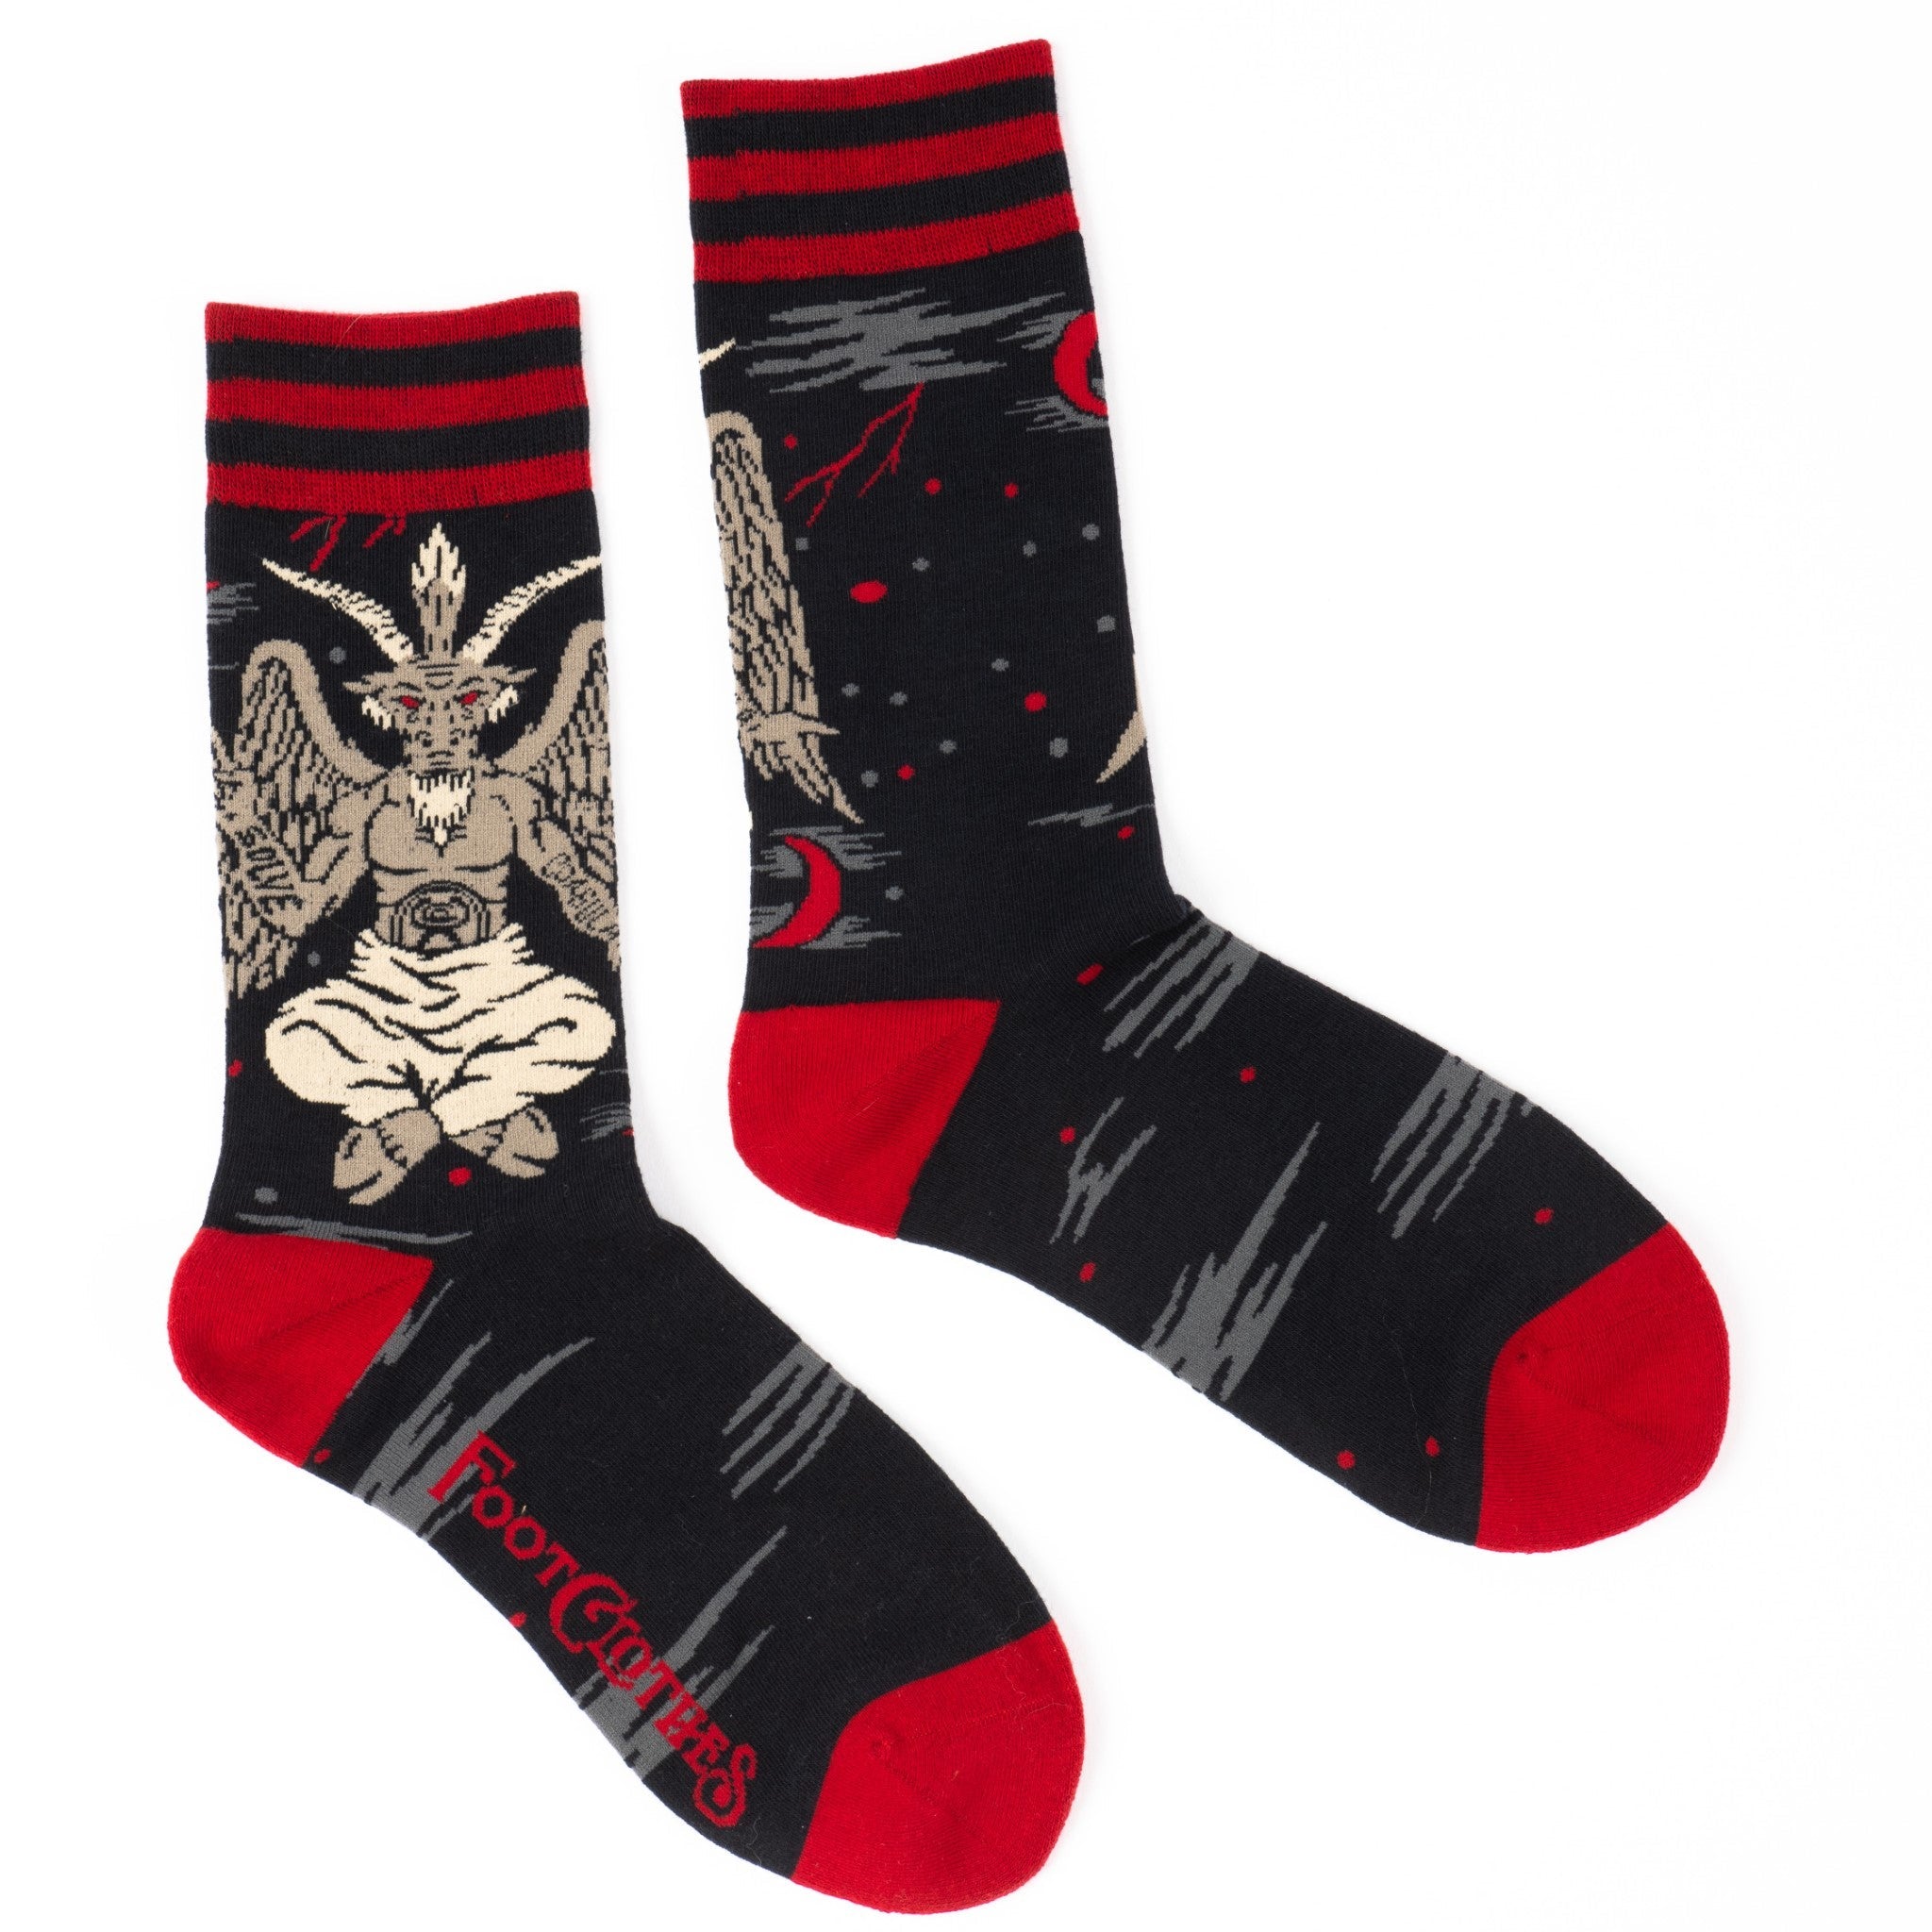 Shown in a flatlay, a pair of unisex crew sock sin black with a red heel and toe. The Cuff is striped red and black while the leg of the sock features a depiction of Baphomet, horns and all!